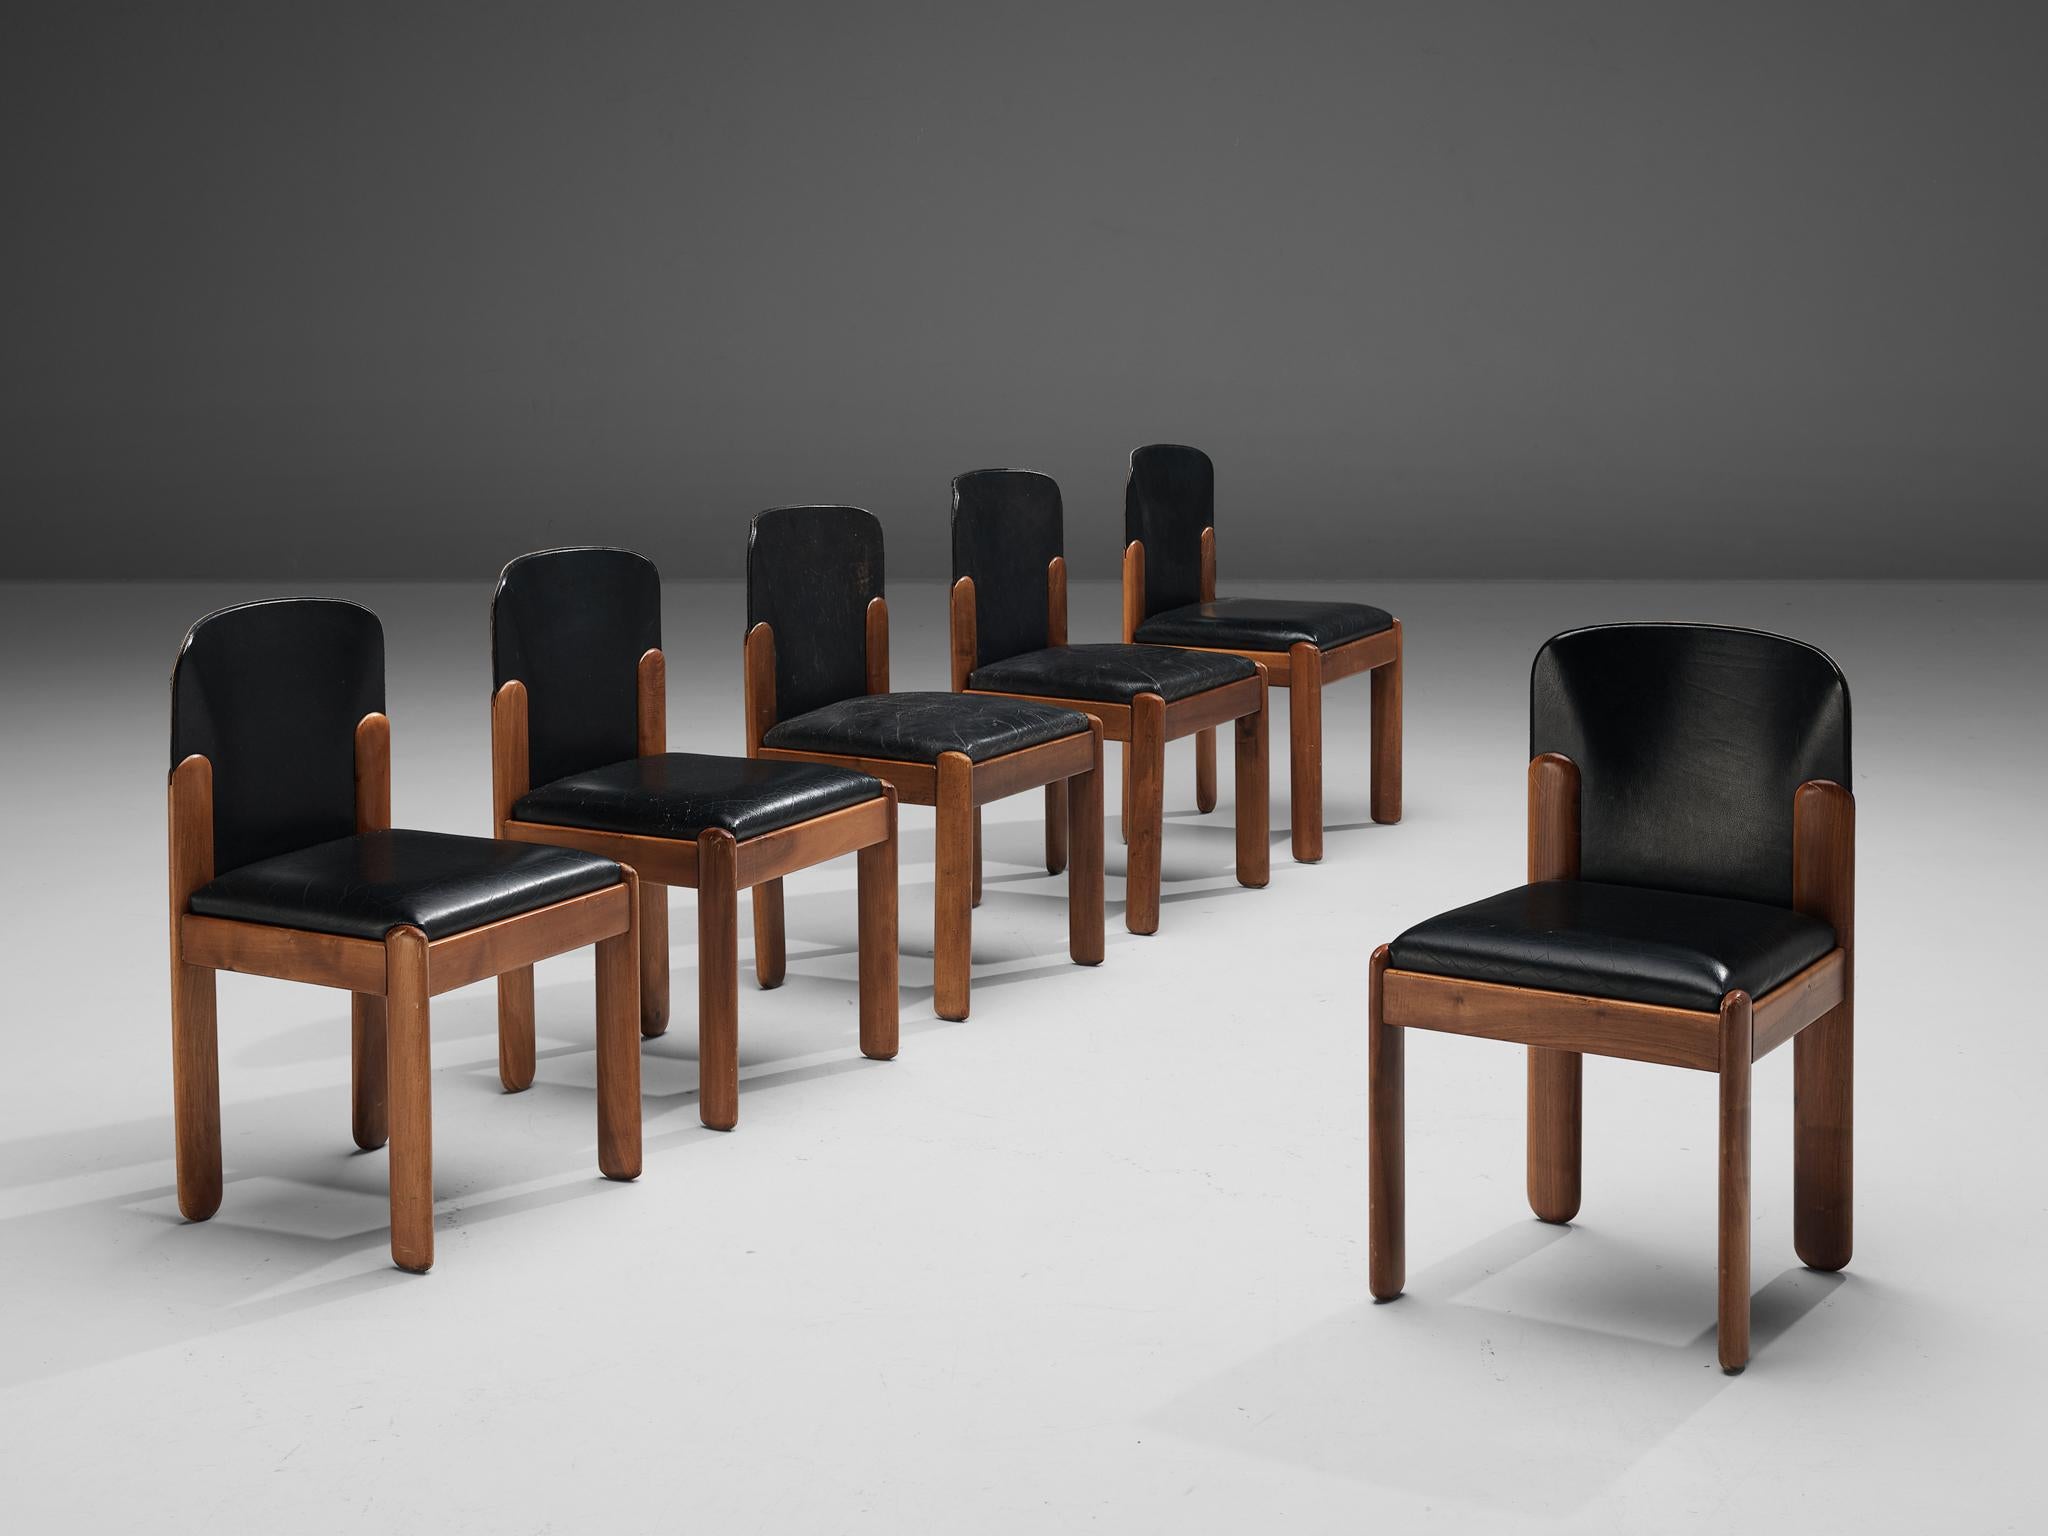 Silvio Coppola for Bernini, six dining chairs model 330, black leather, walnut, Italy, 1960s

Wonderful set of six dining chairs by Italian designer Silvio Coppola. These aesthetically well balanced chairs strongly convince with the contrast